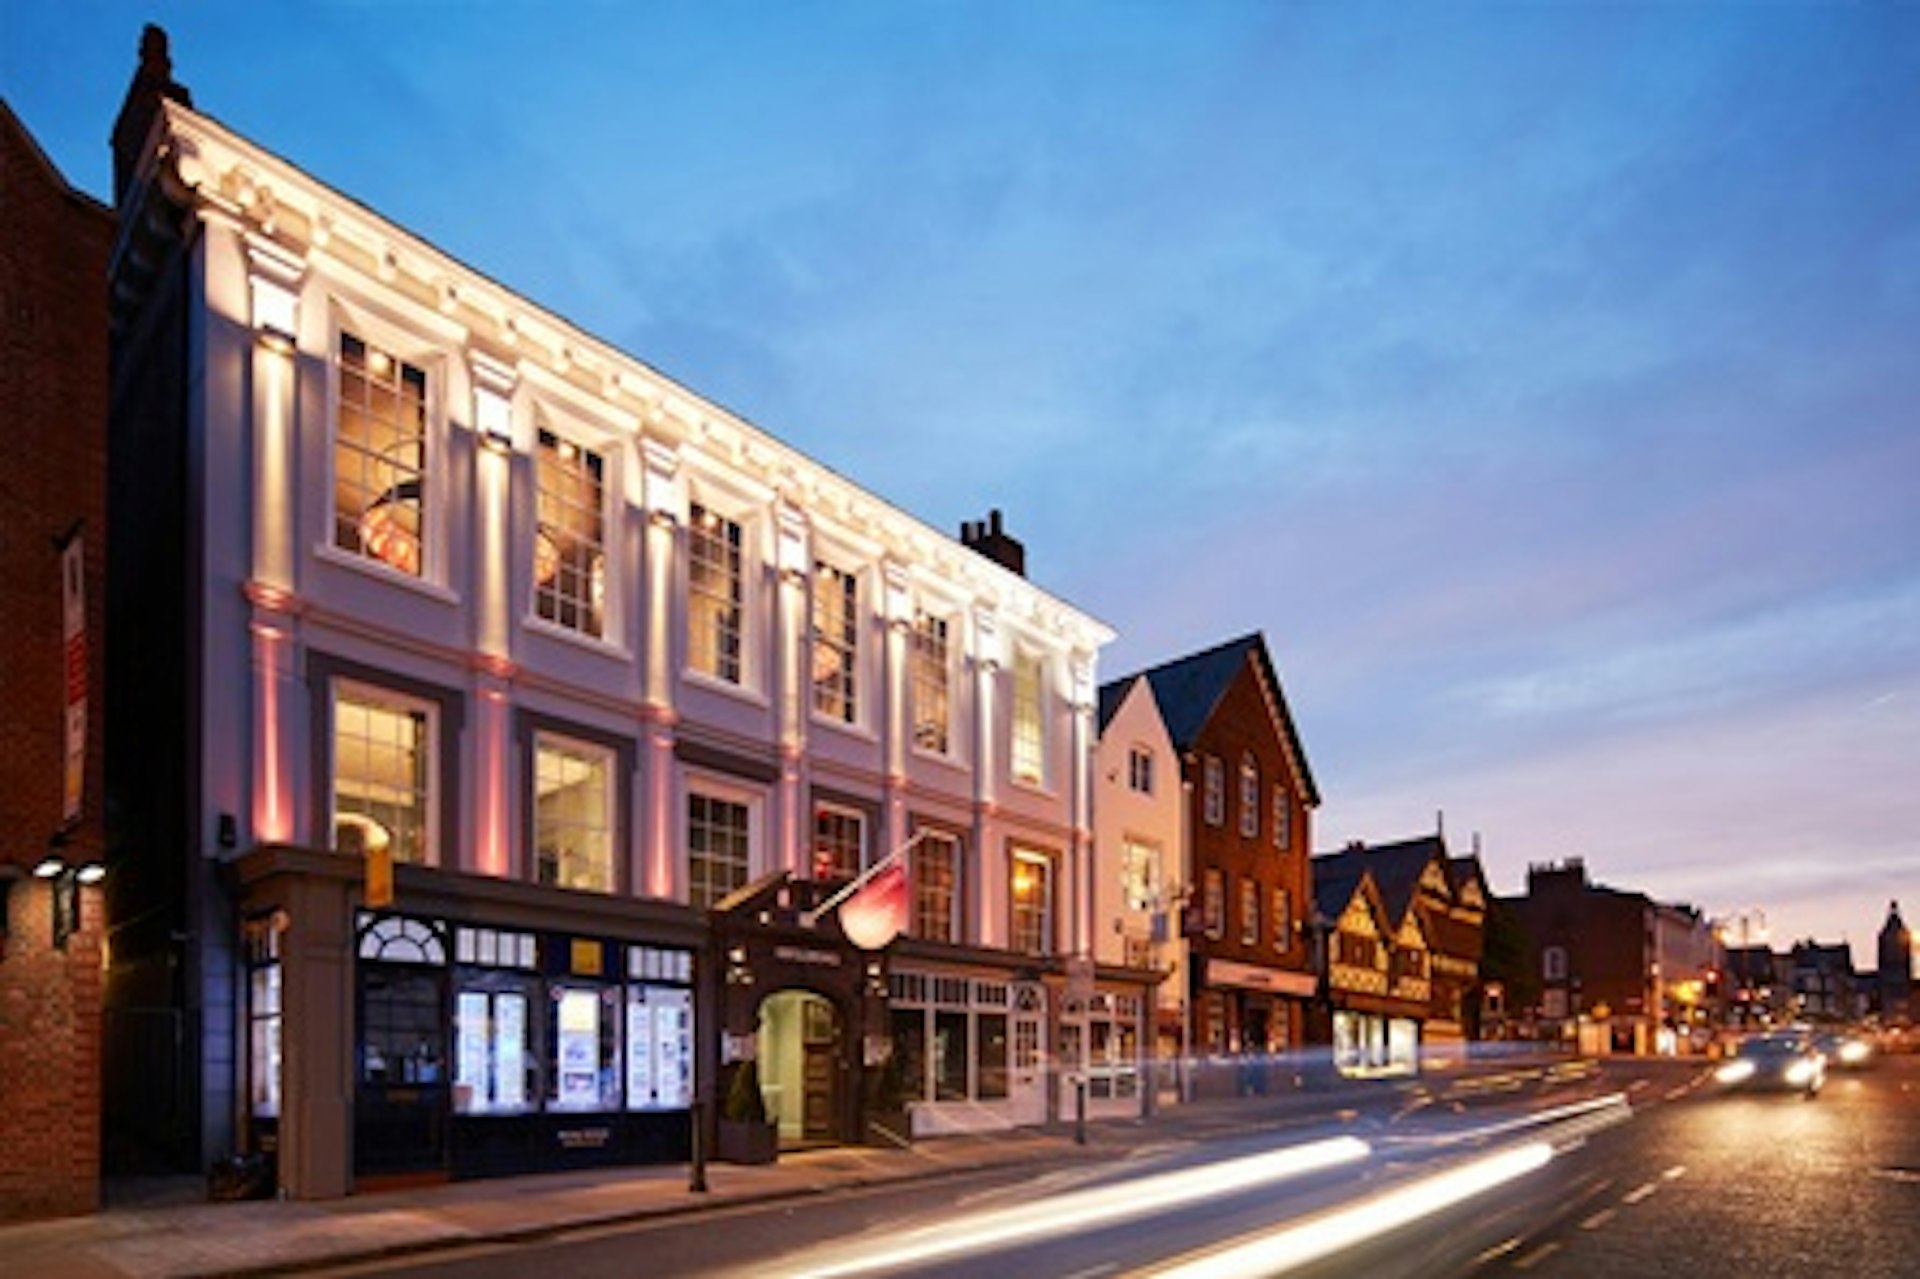 Two Night 4* City Break for Two at Oddfellows Chester 1